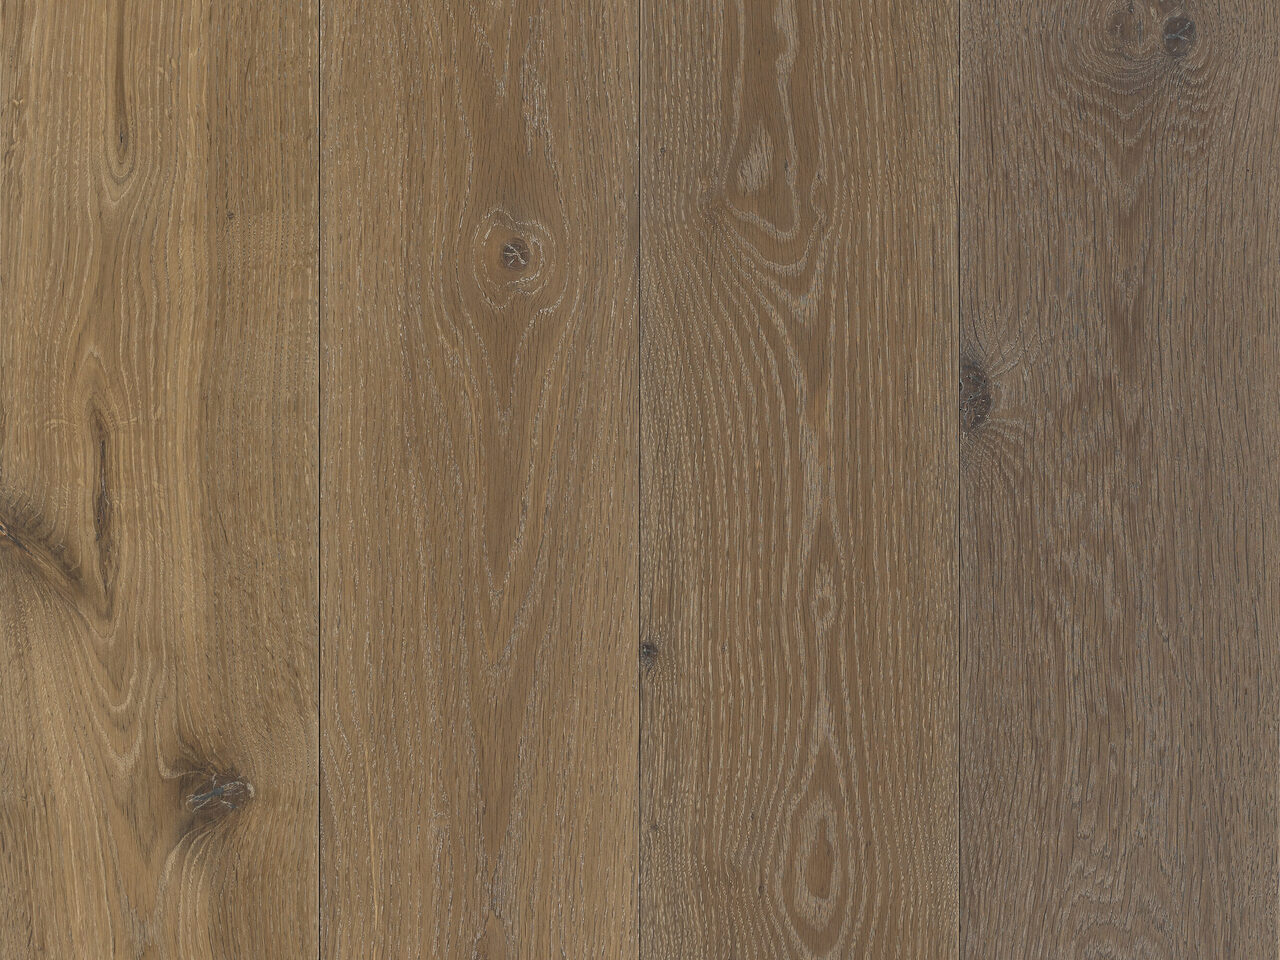 Tranquility Signature Collection Engineered Wood Flooring Products